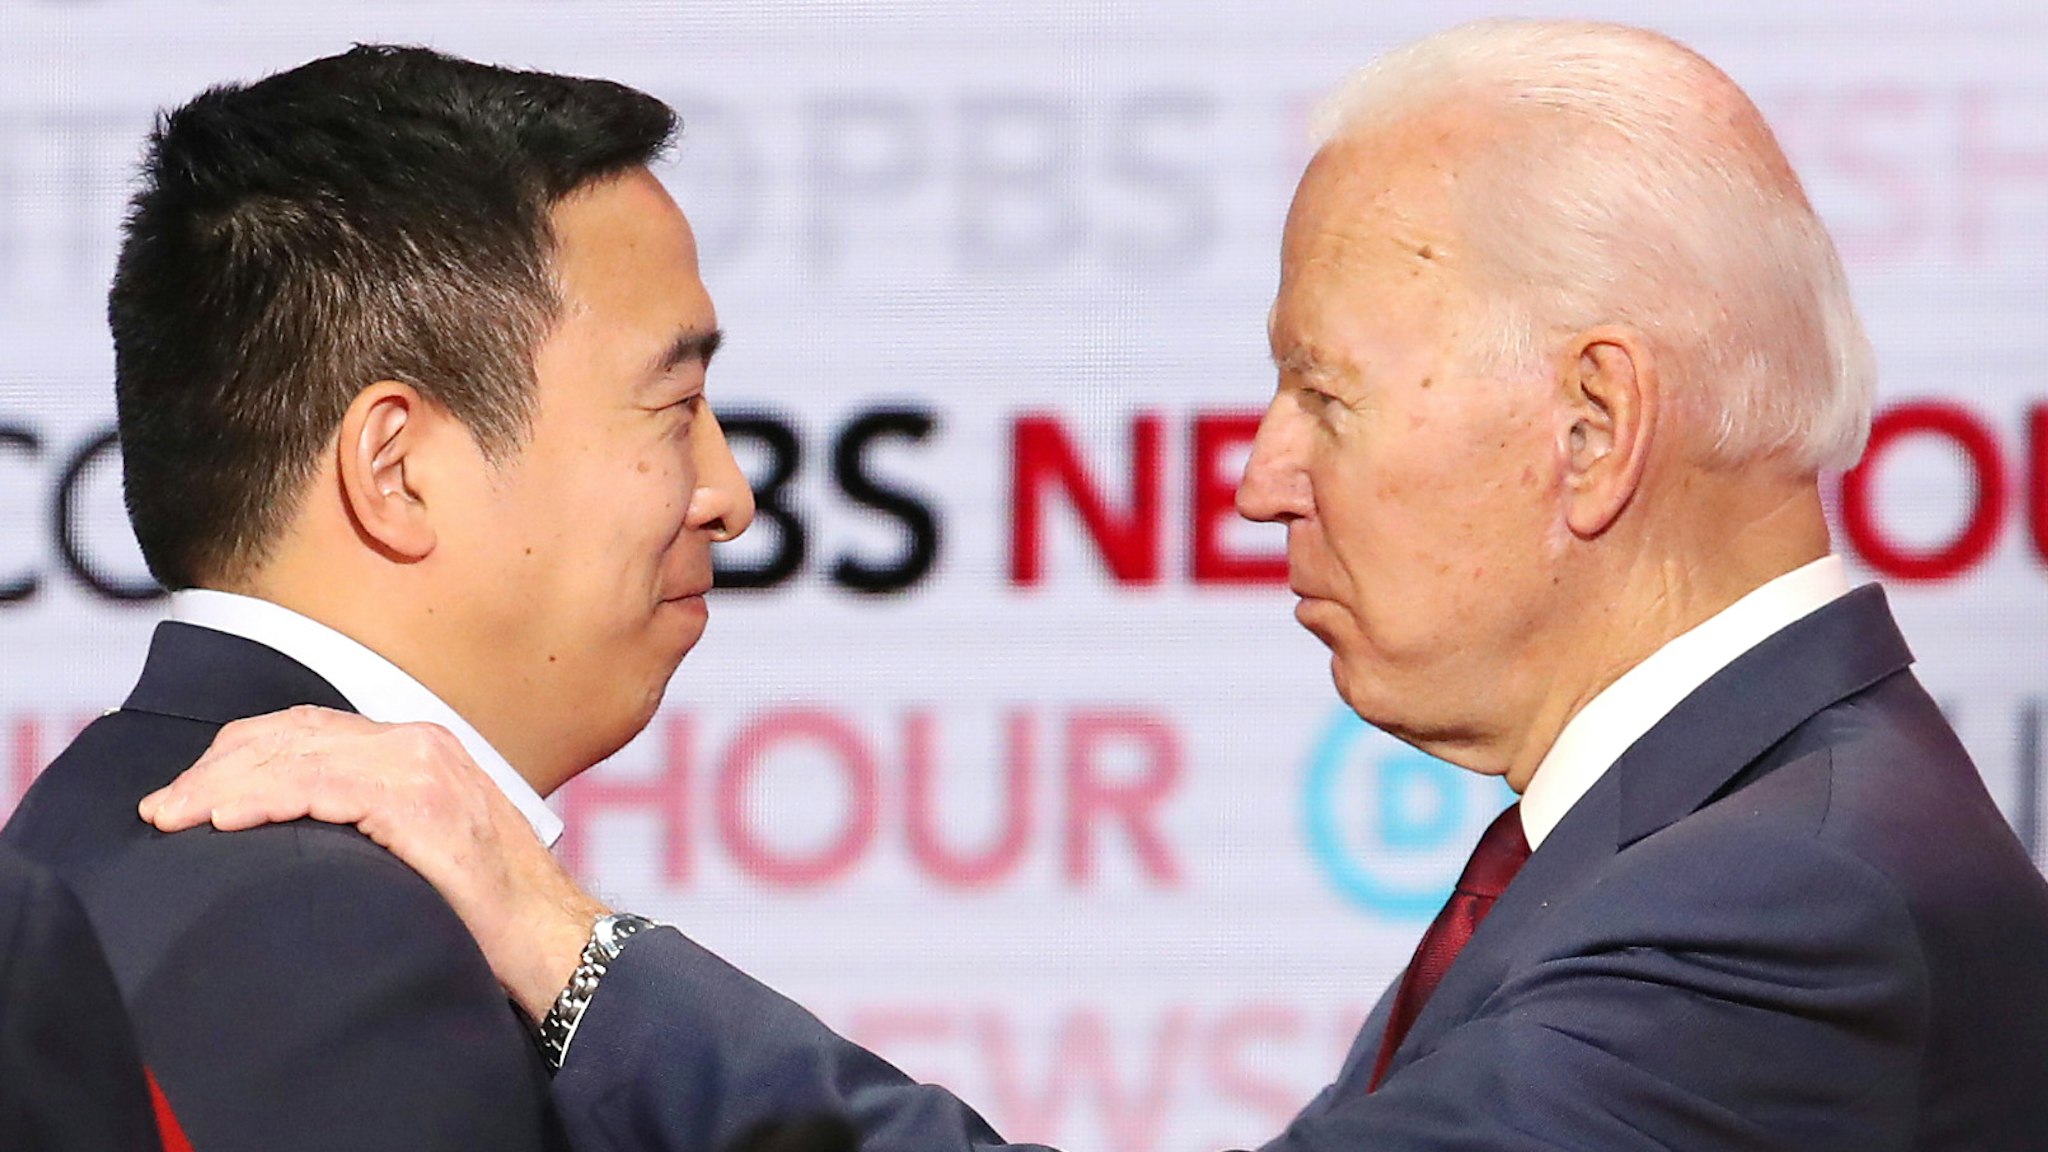 LOS ANGELES, CALIFORNIA - DECEMBER 19: Democratic presidential candidate Andrew Yang (L) speaks with former Vice President Joe Biden during the Democratic presidential primary debate at Loyola Marymount University on December 19, 2019 in Los Angeles, California. Seven candidates out of the crowded field qualified for the 6th and last Democratic presidential primary debate of 2019 hosted by PBS NewsHour and Politico.